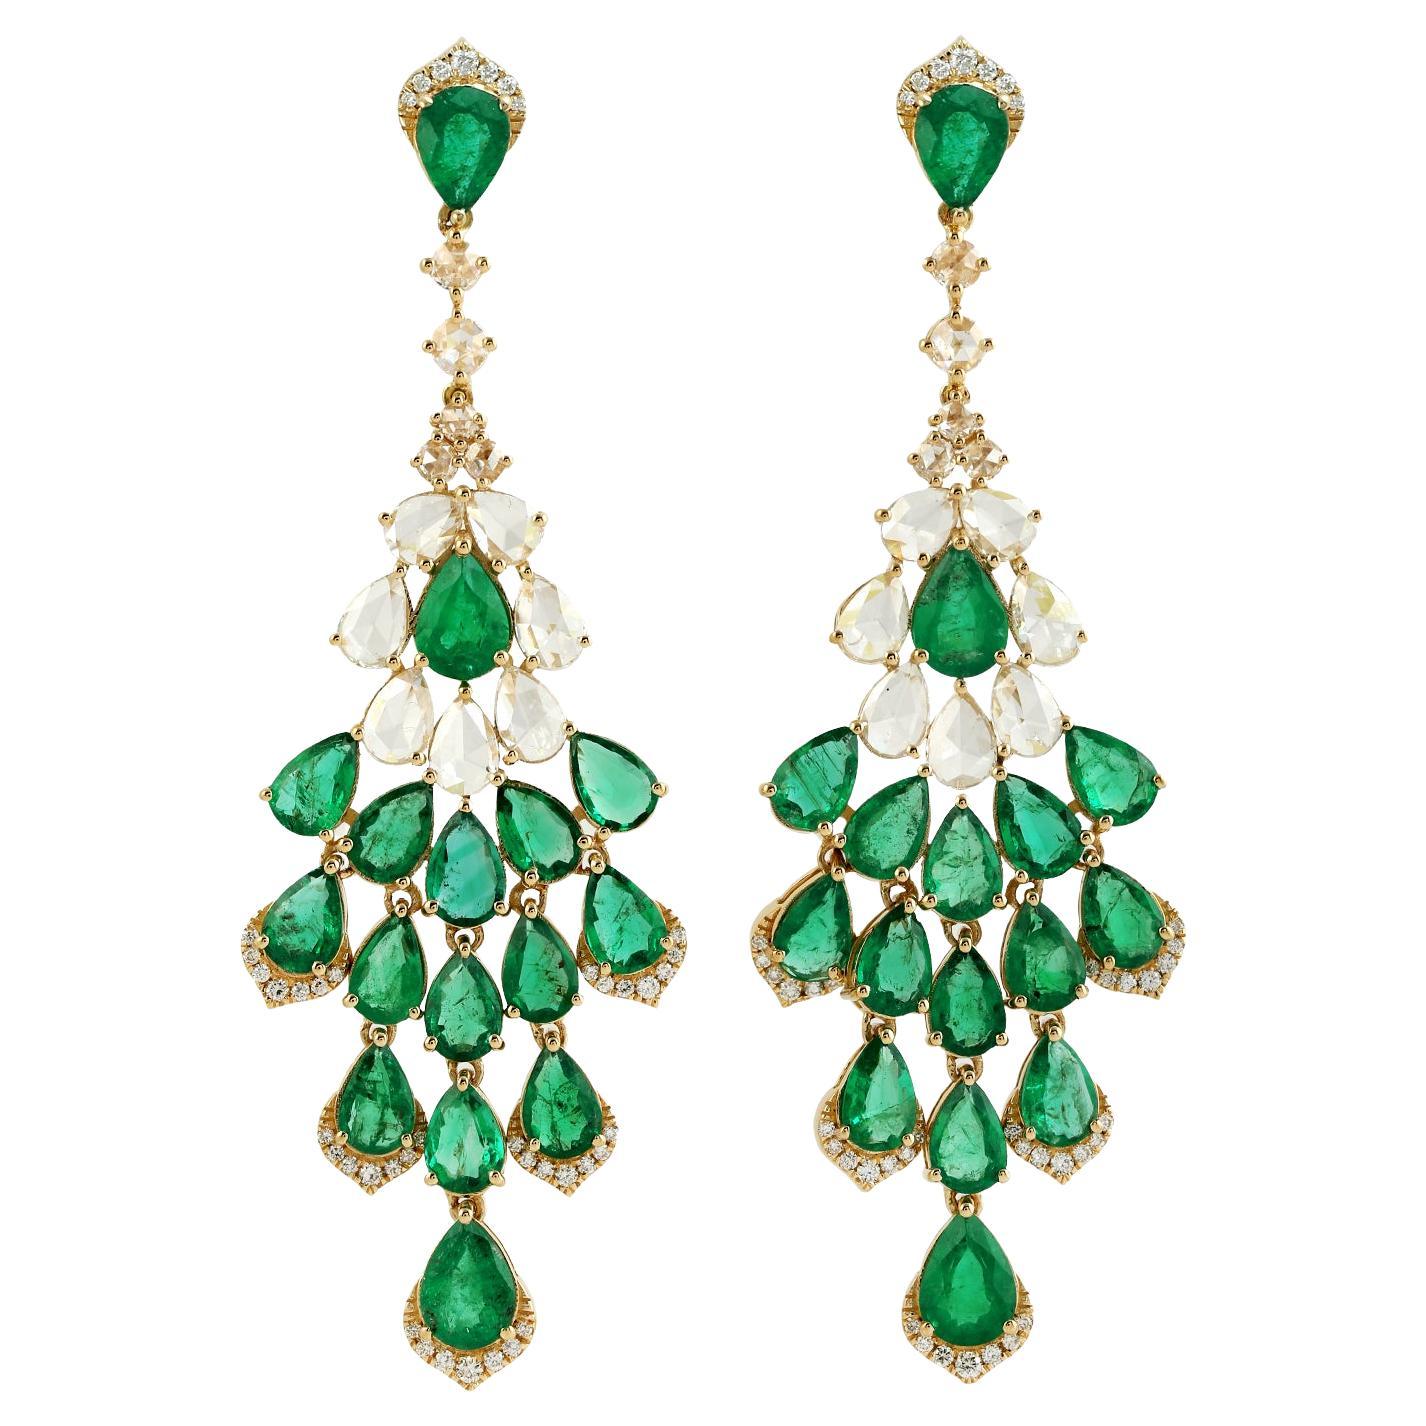 11.34ct Pear Shaped Emerald Dangle Earrings With Diamonds In 18k Yellow Gold For Sale